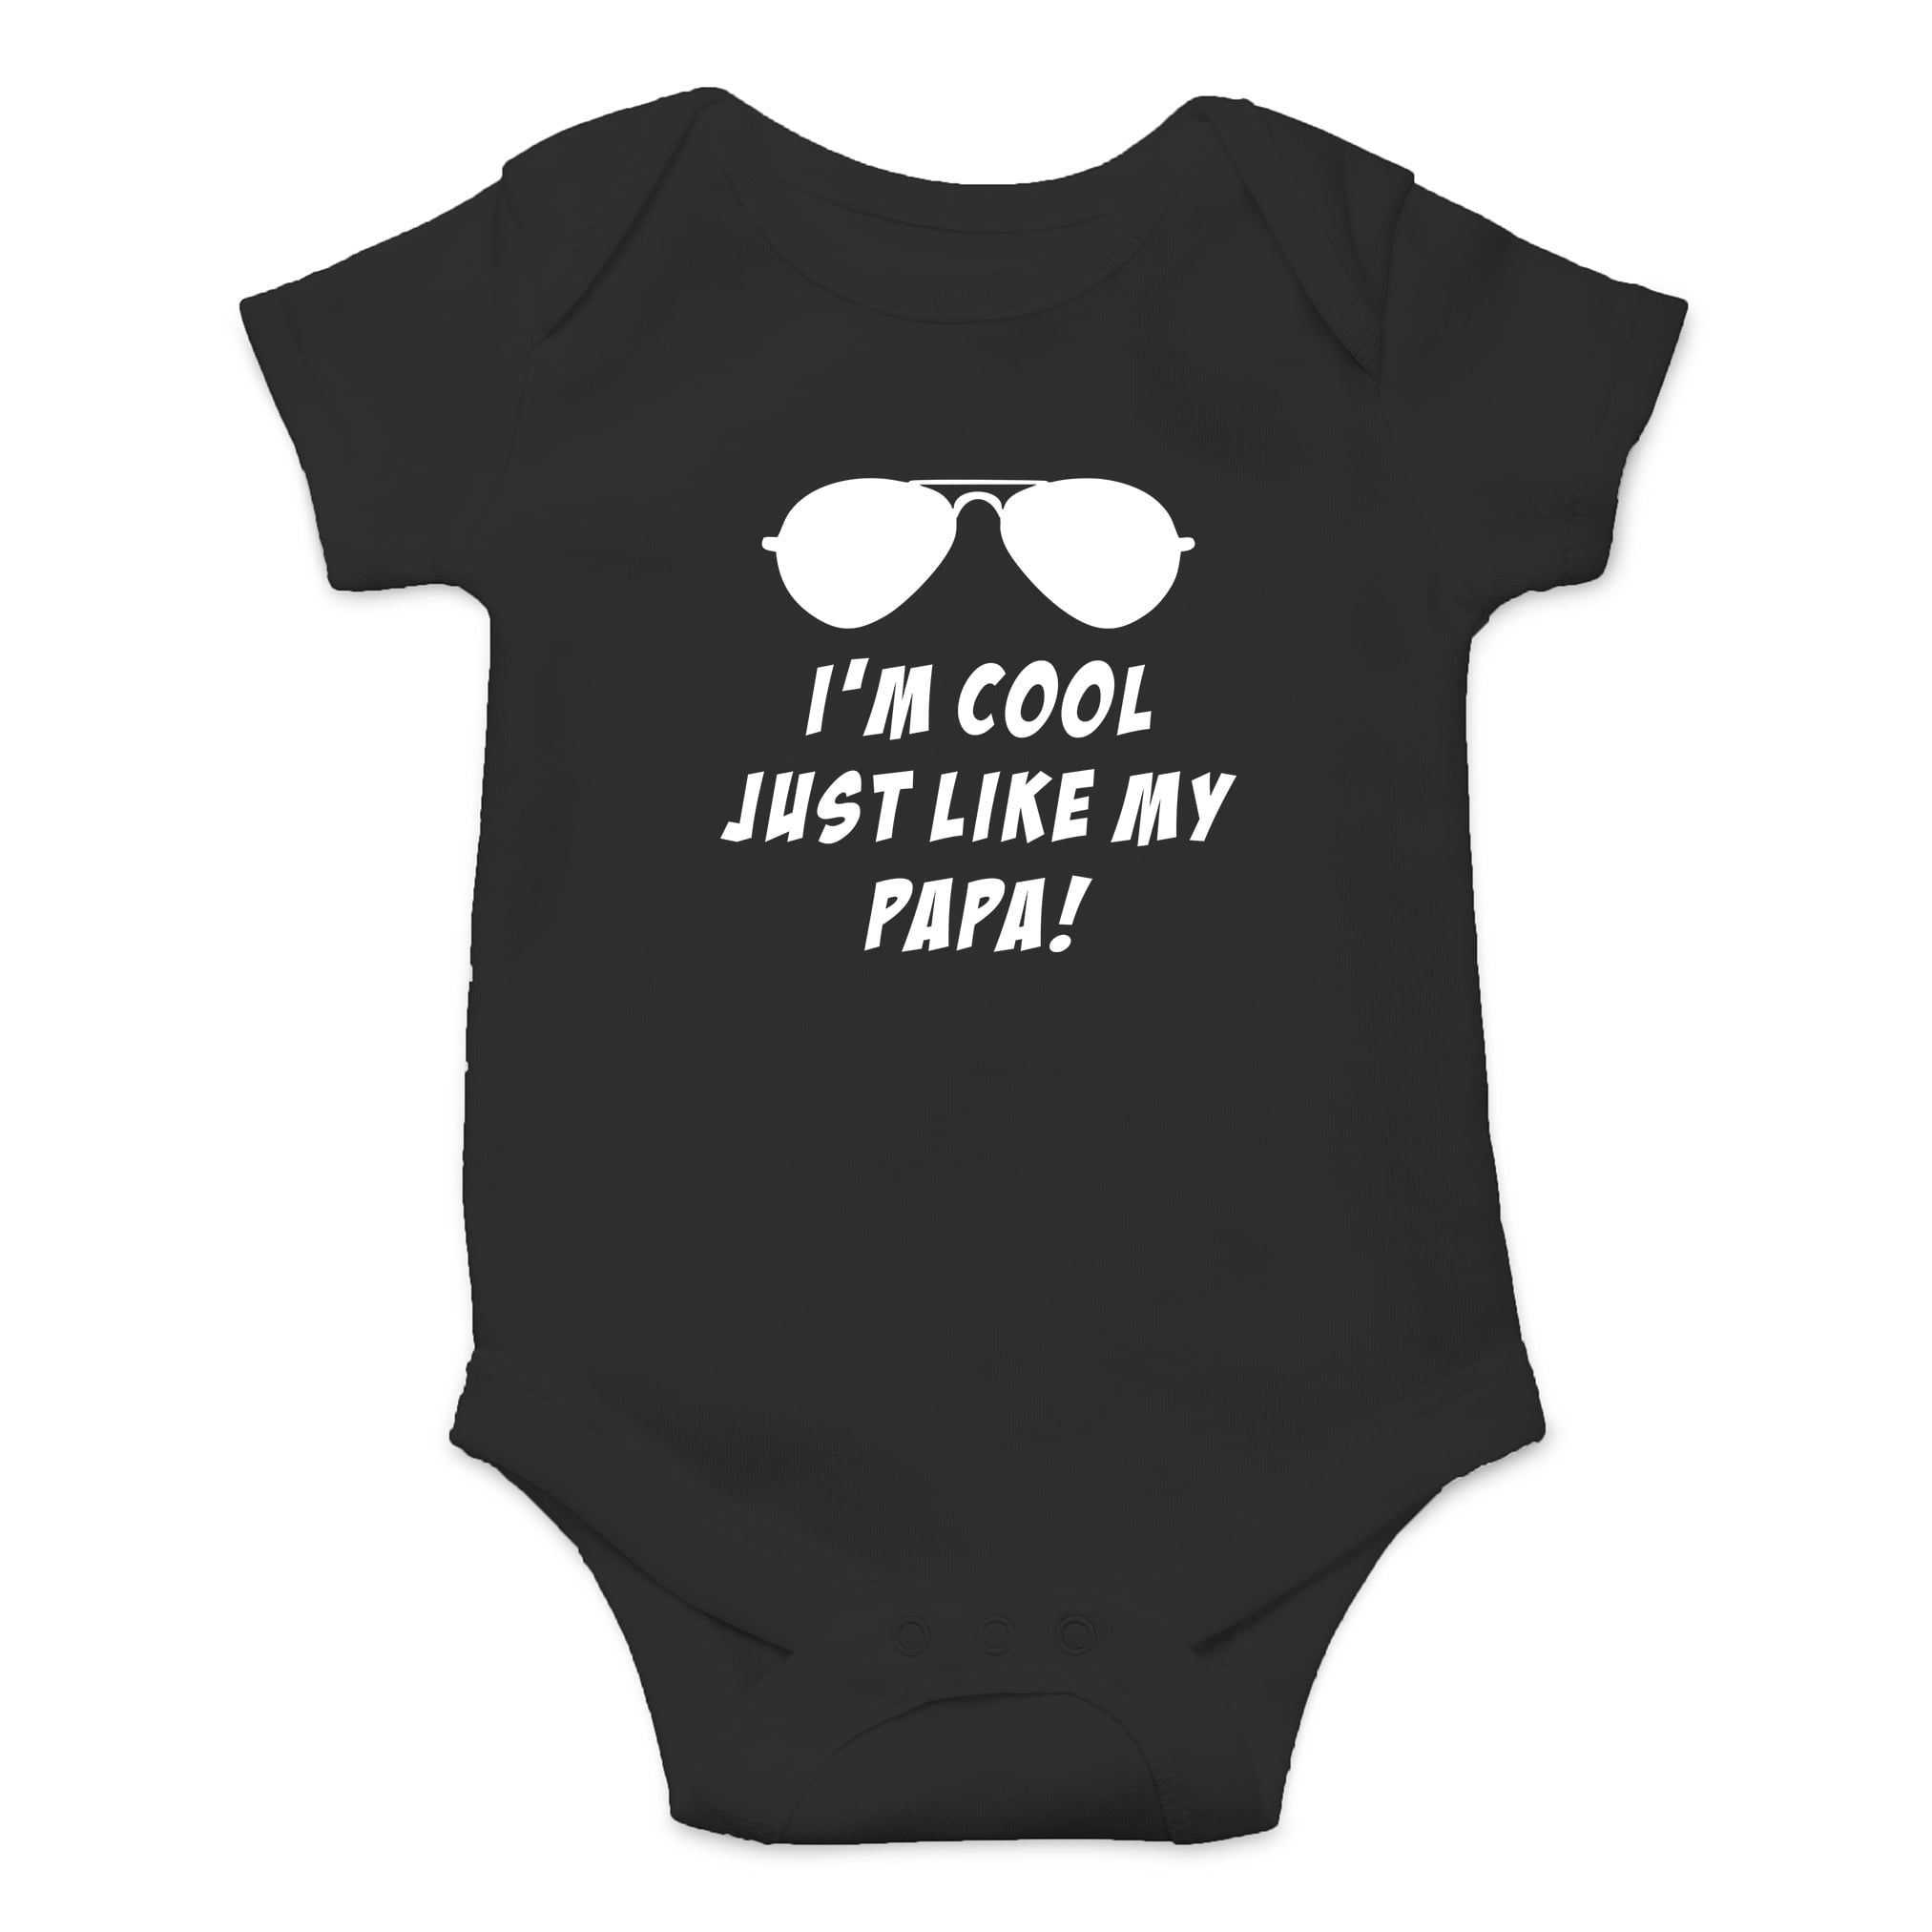 My Dad Rocks Baby One Piece Romper Suit Clothing Boy Girl Funny Gift Cotton 